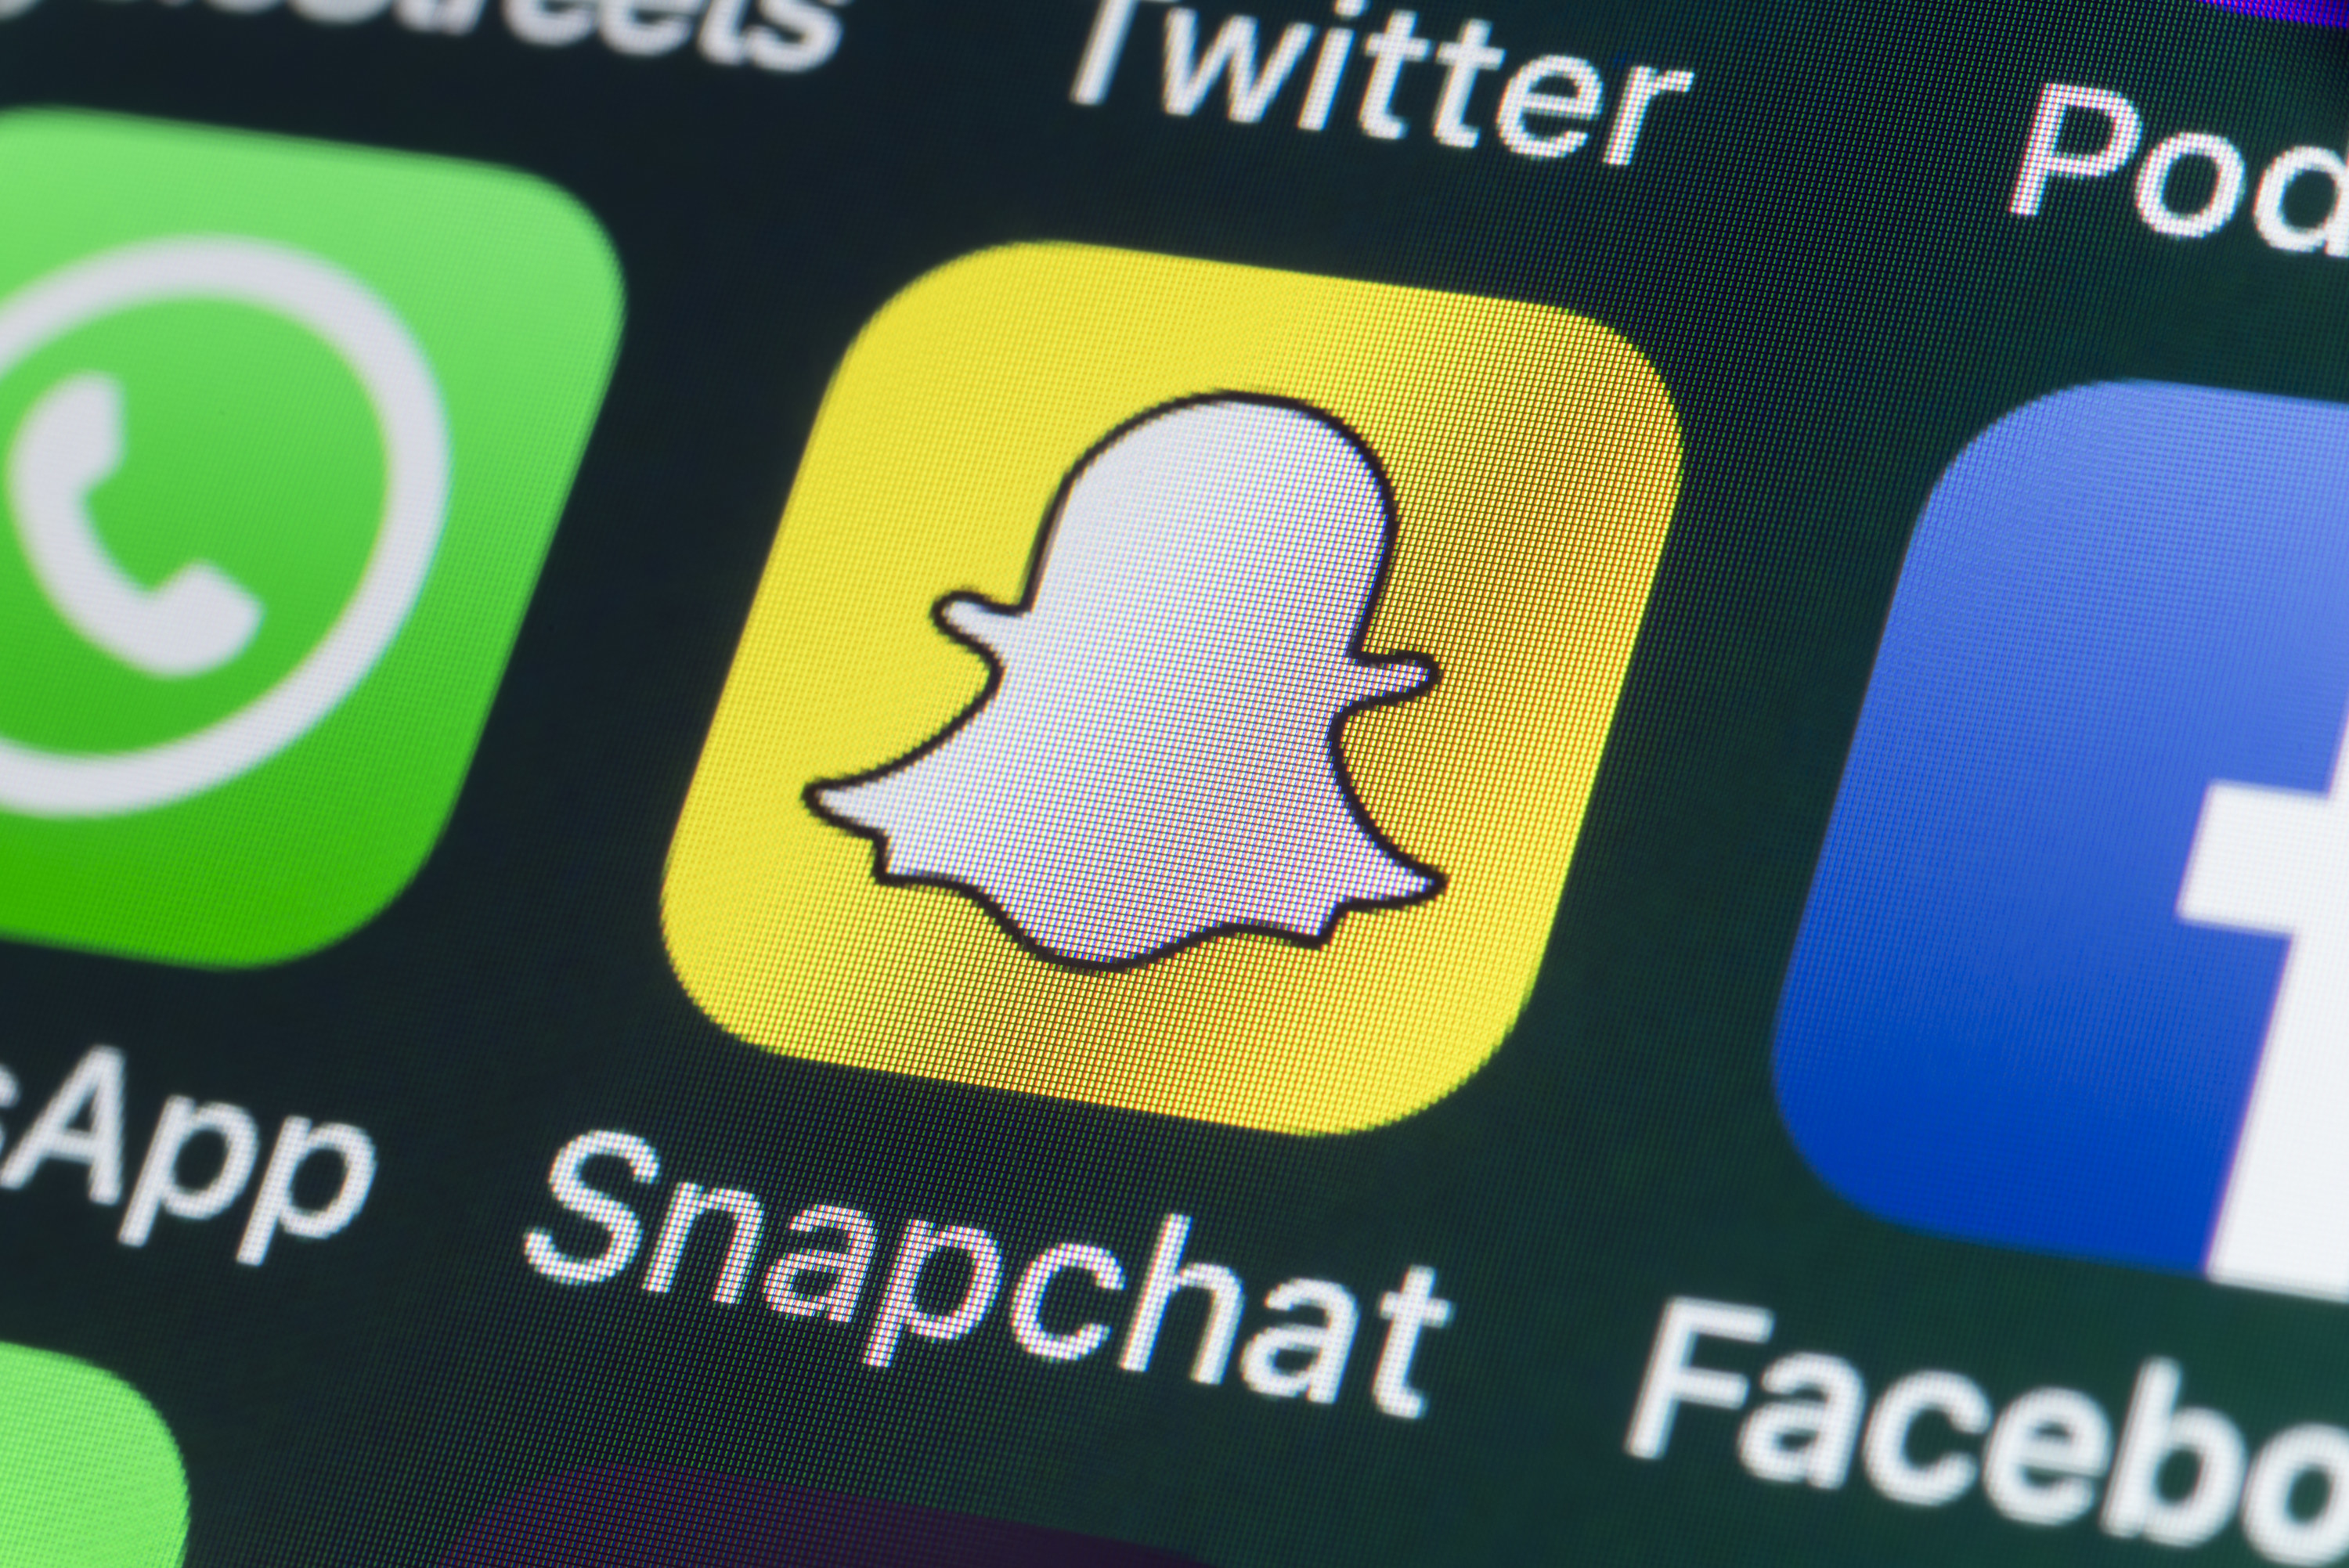 the Snapchat app on a mobile smartphone